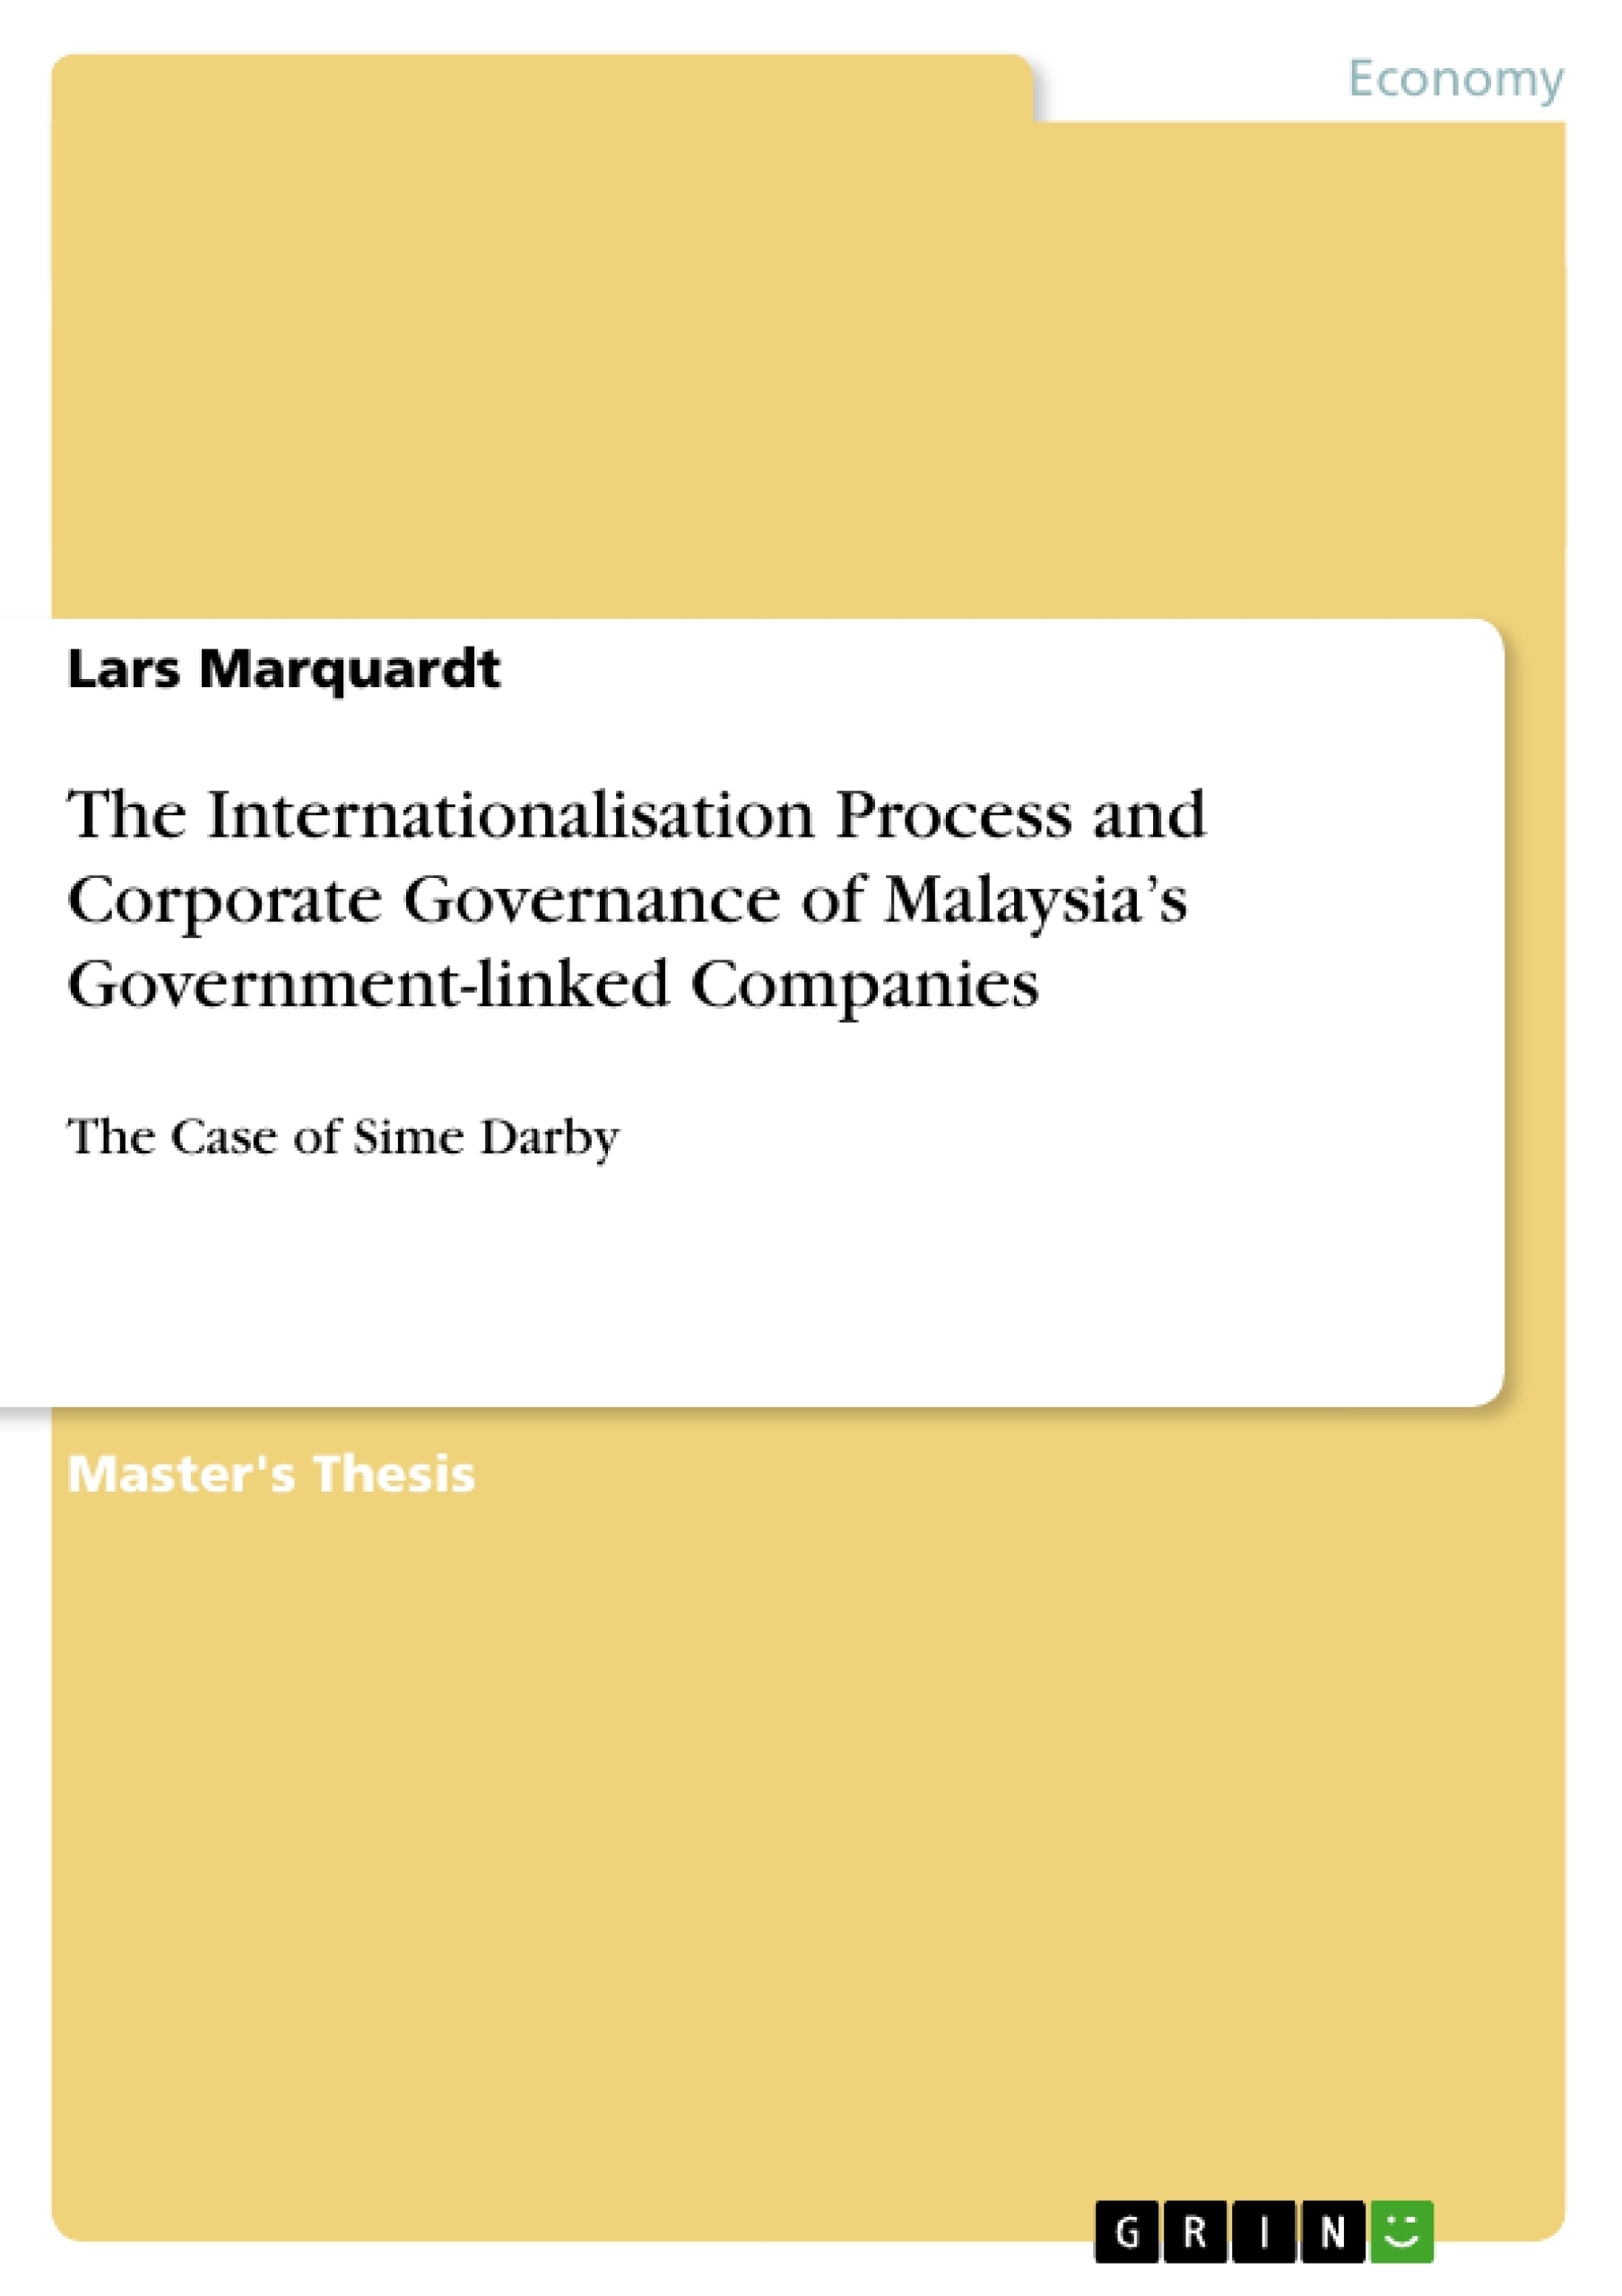 Título: The Internationalisation Process and Corporate Governance of Malaysia’s Government-linked Companies